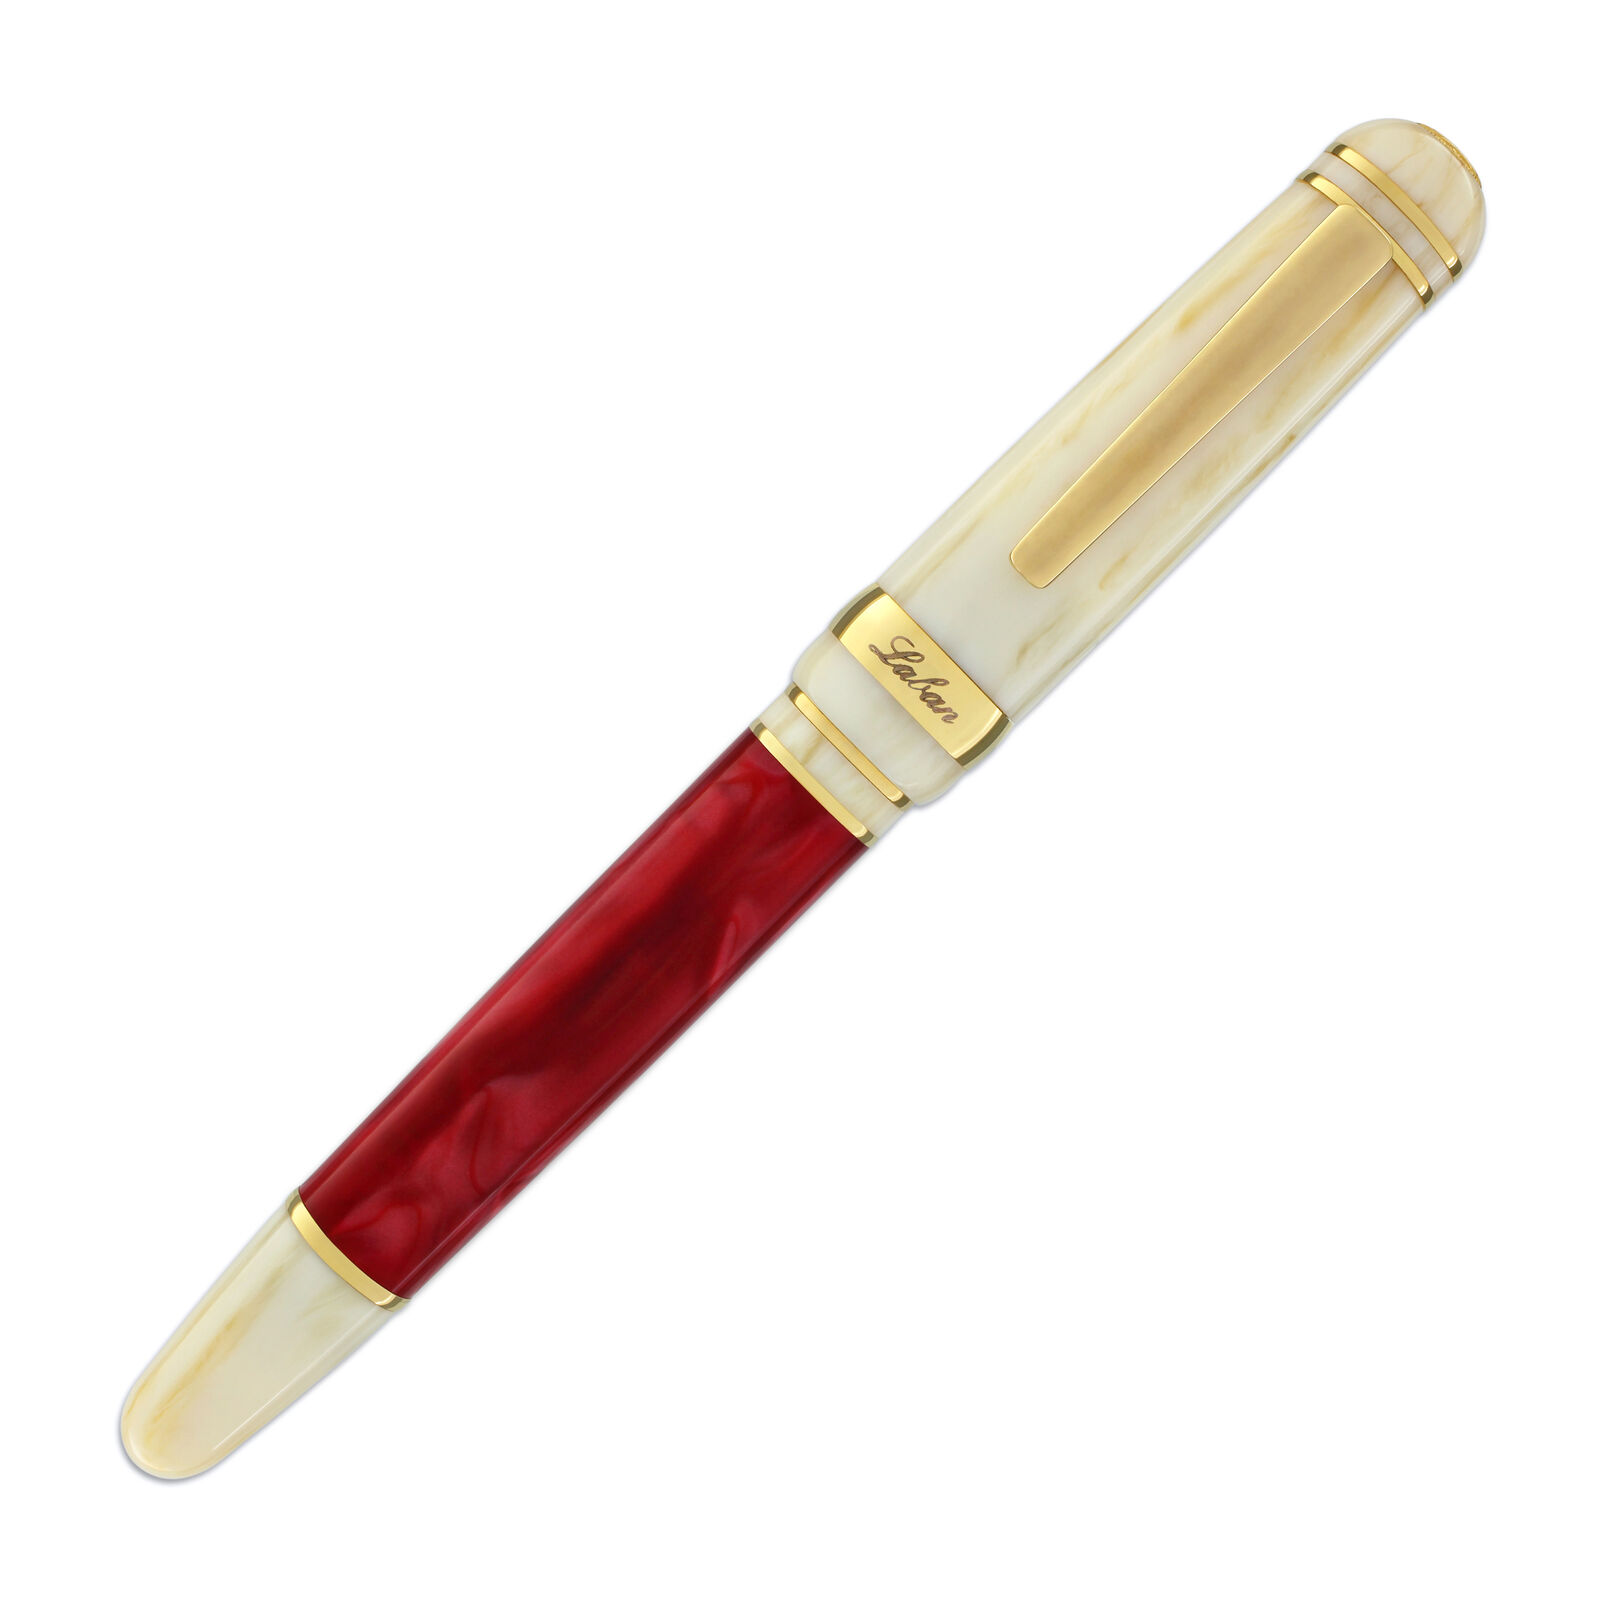 Laban 325 Rollerball Pen in Flame - NEW in original Laban box LTR-325-Flame